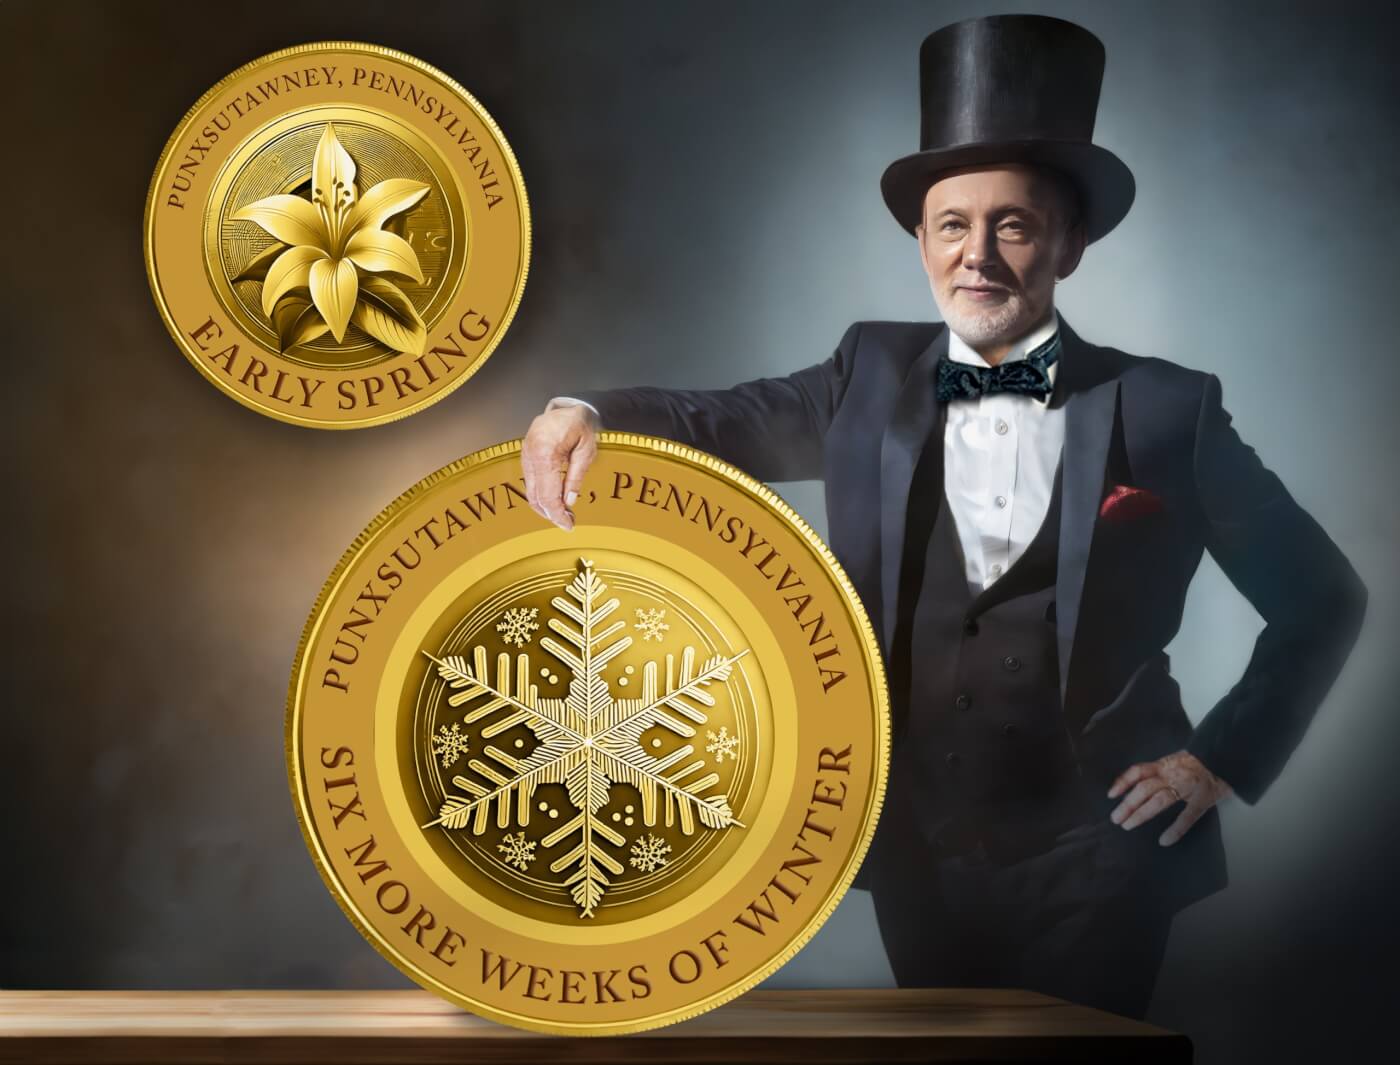 Photo of a man in a suit next to a giant gold coin showing two sides